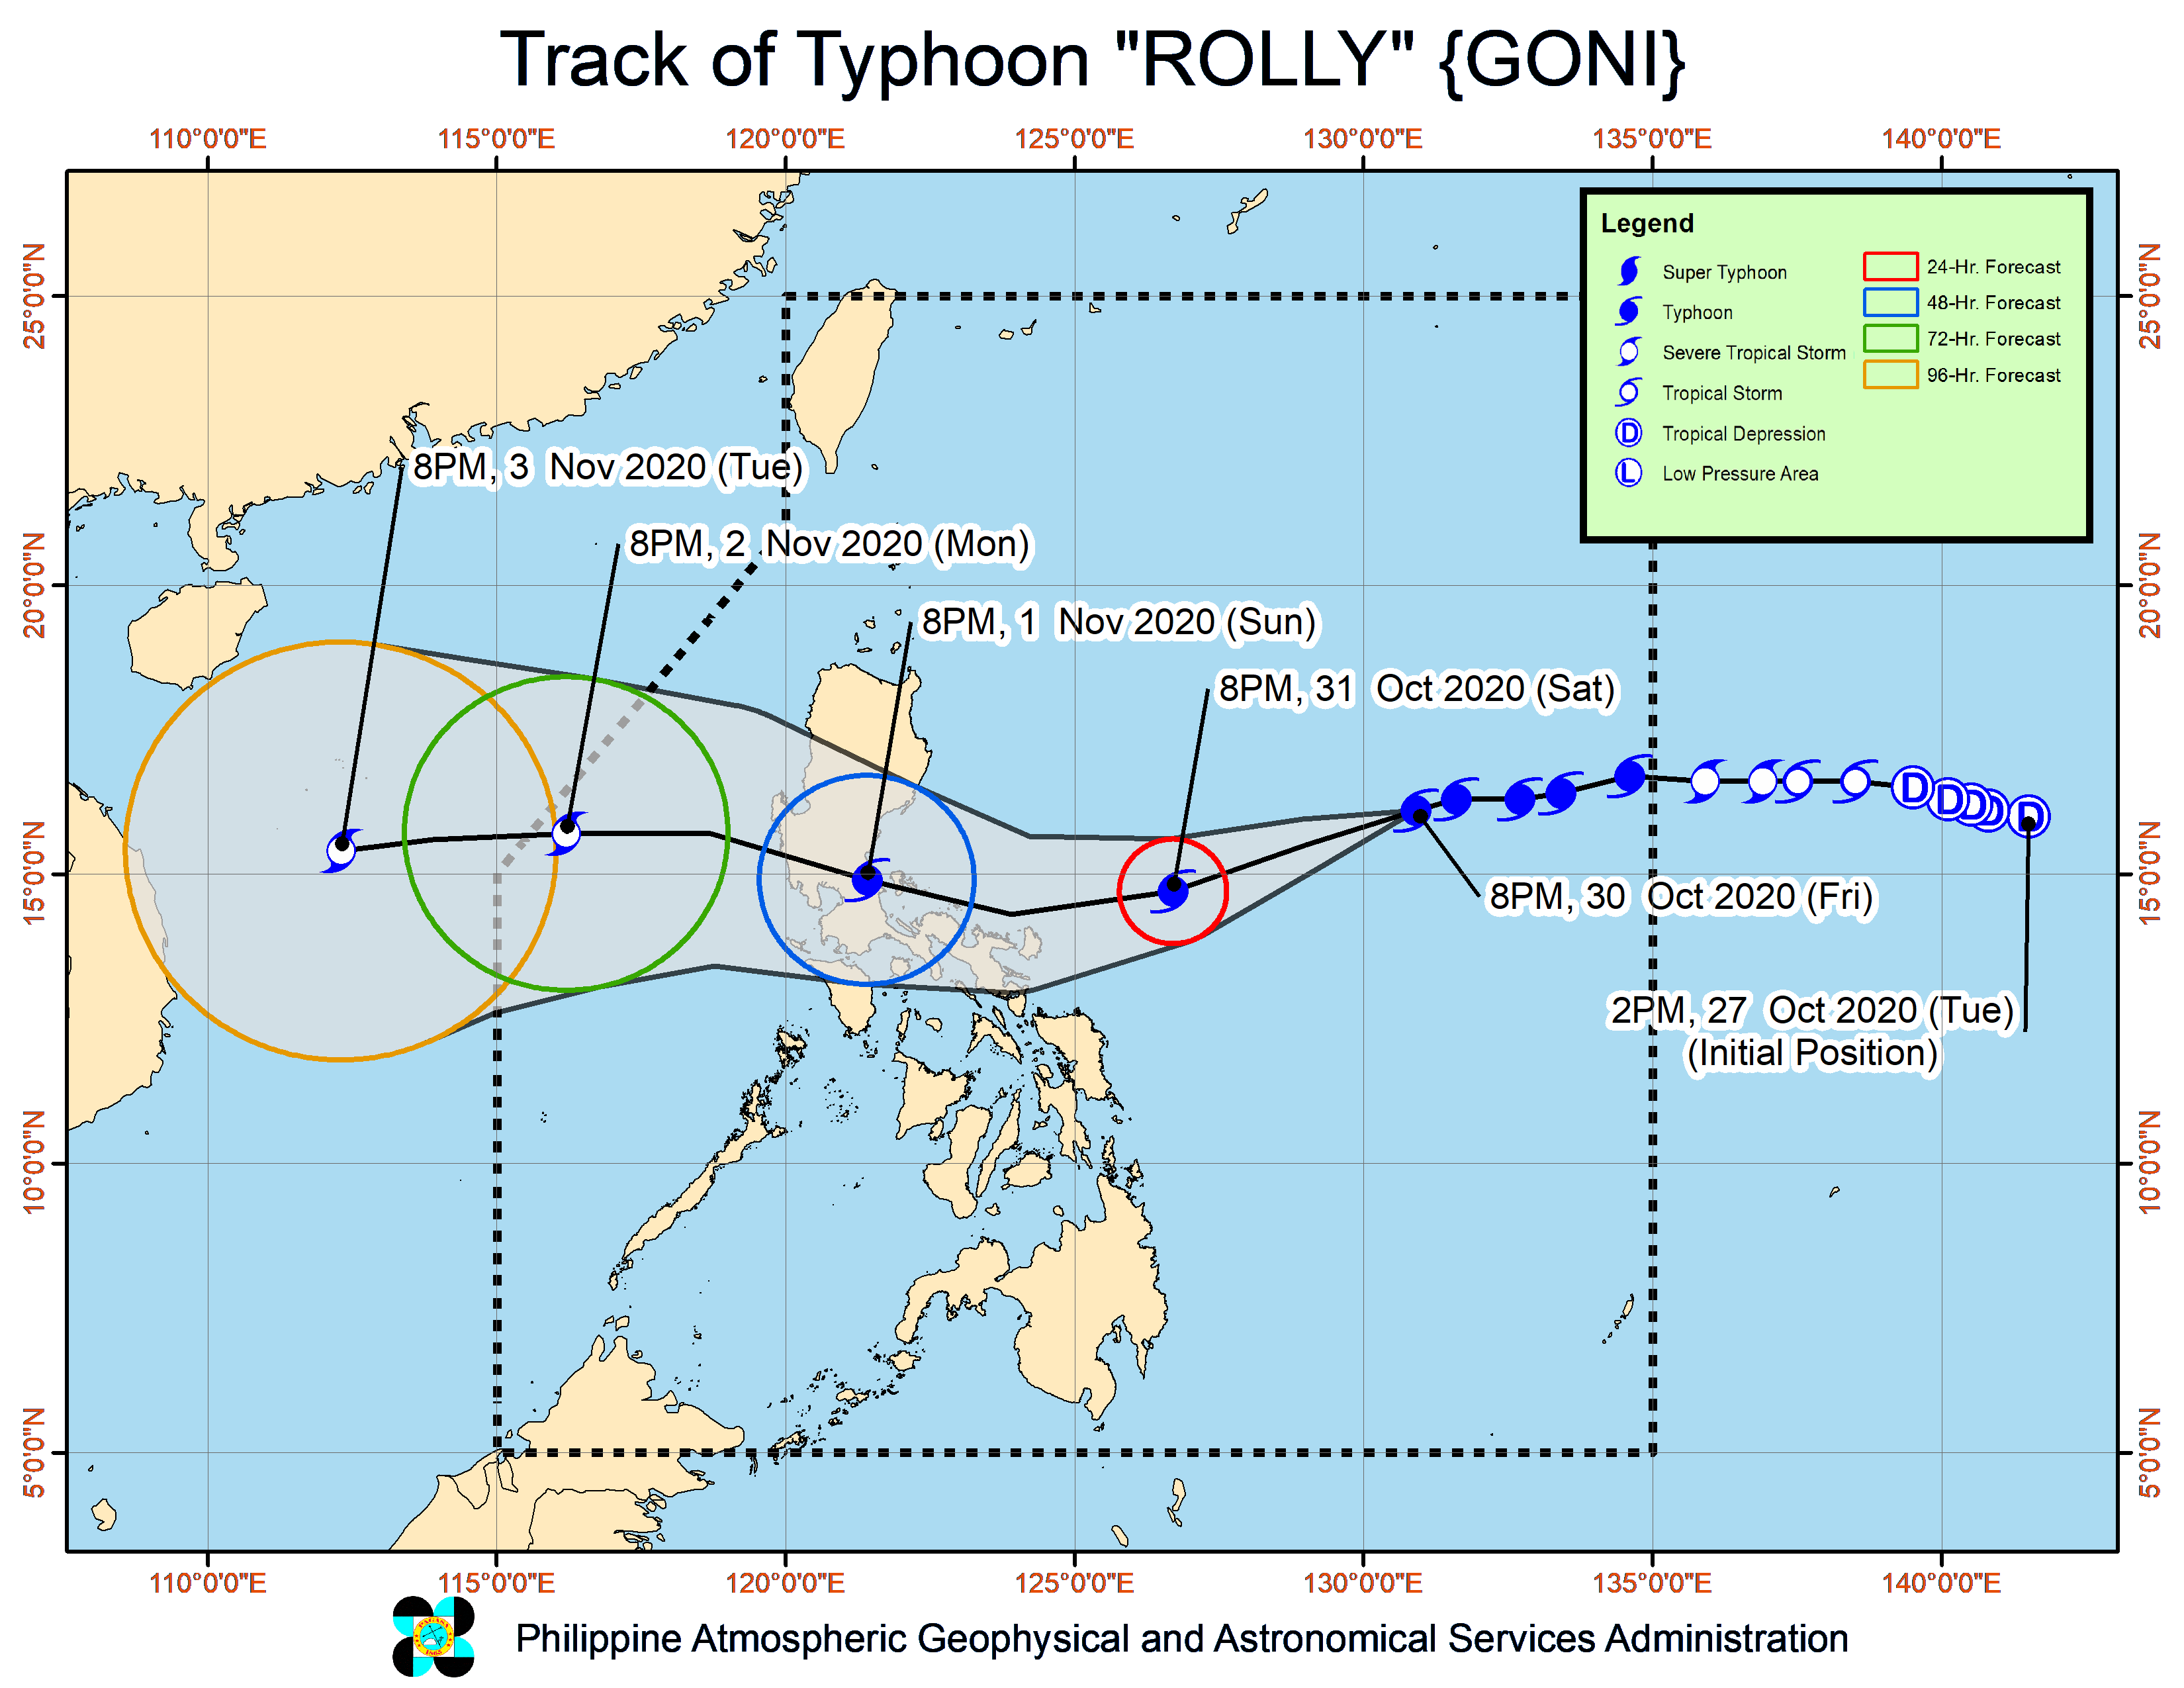 ‘Rolly’ nearing super typhoon category, seen to intensify further